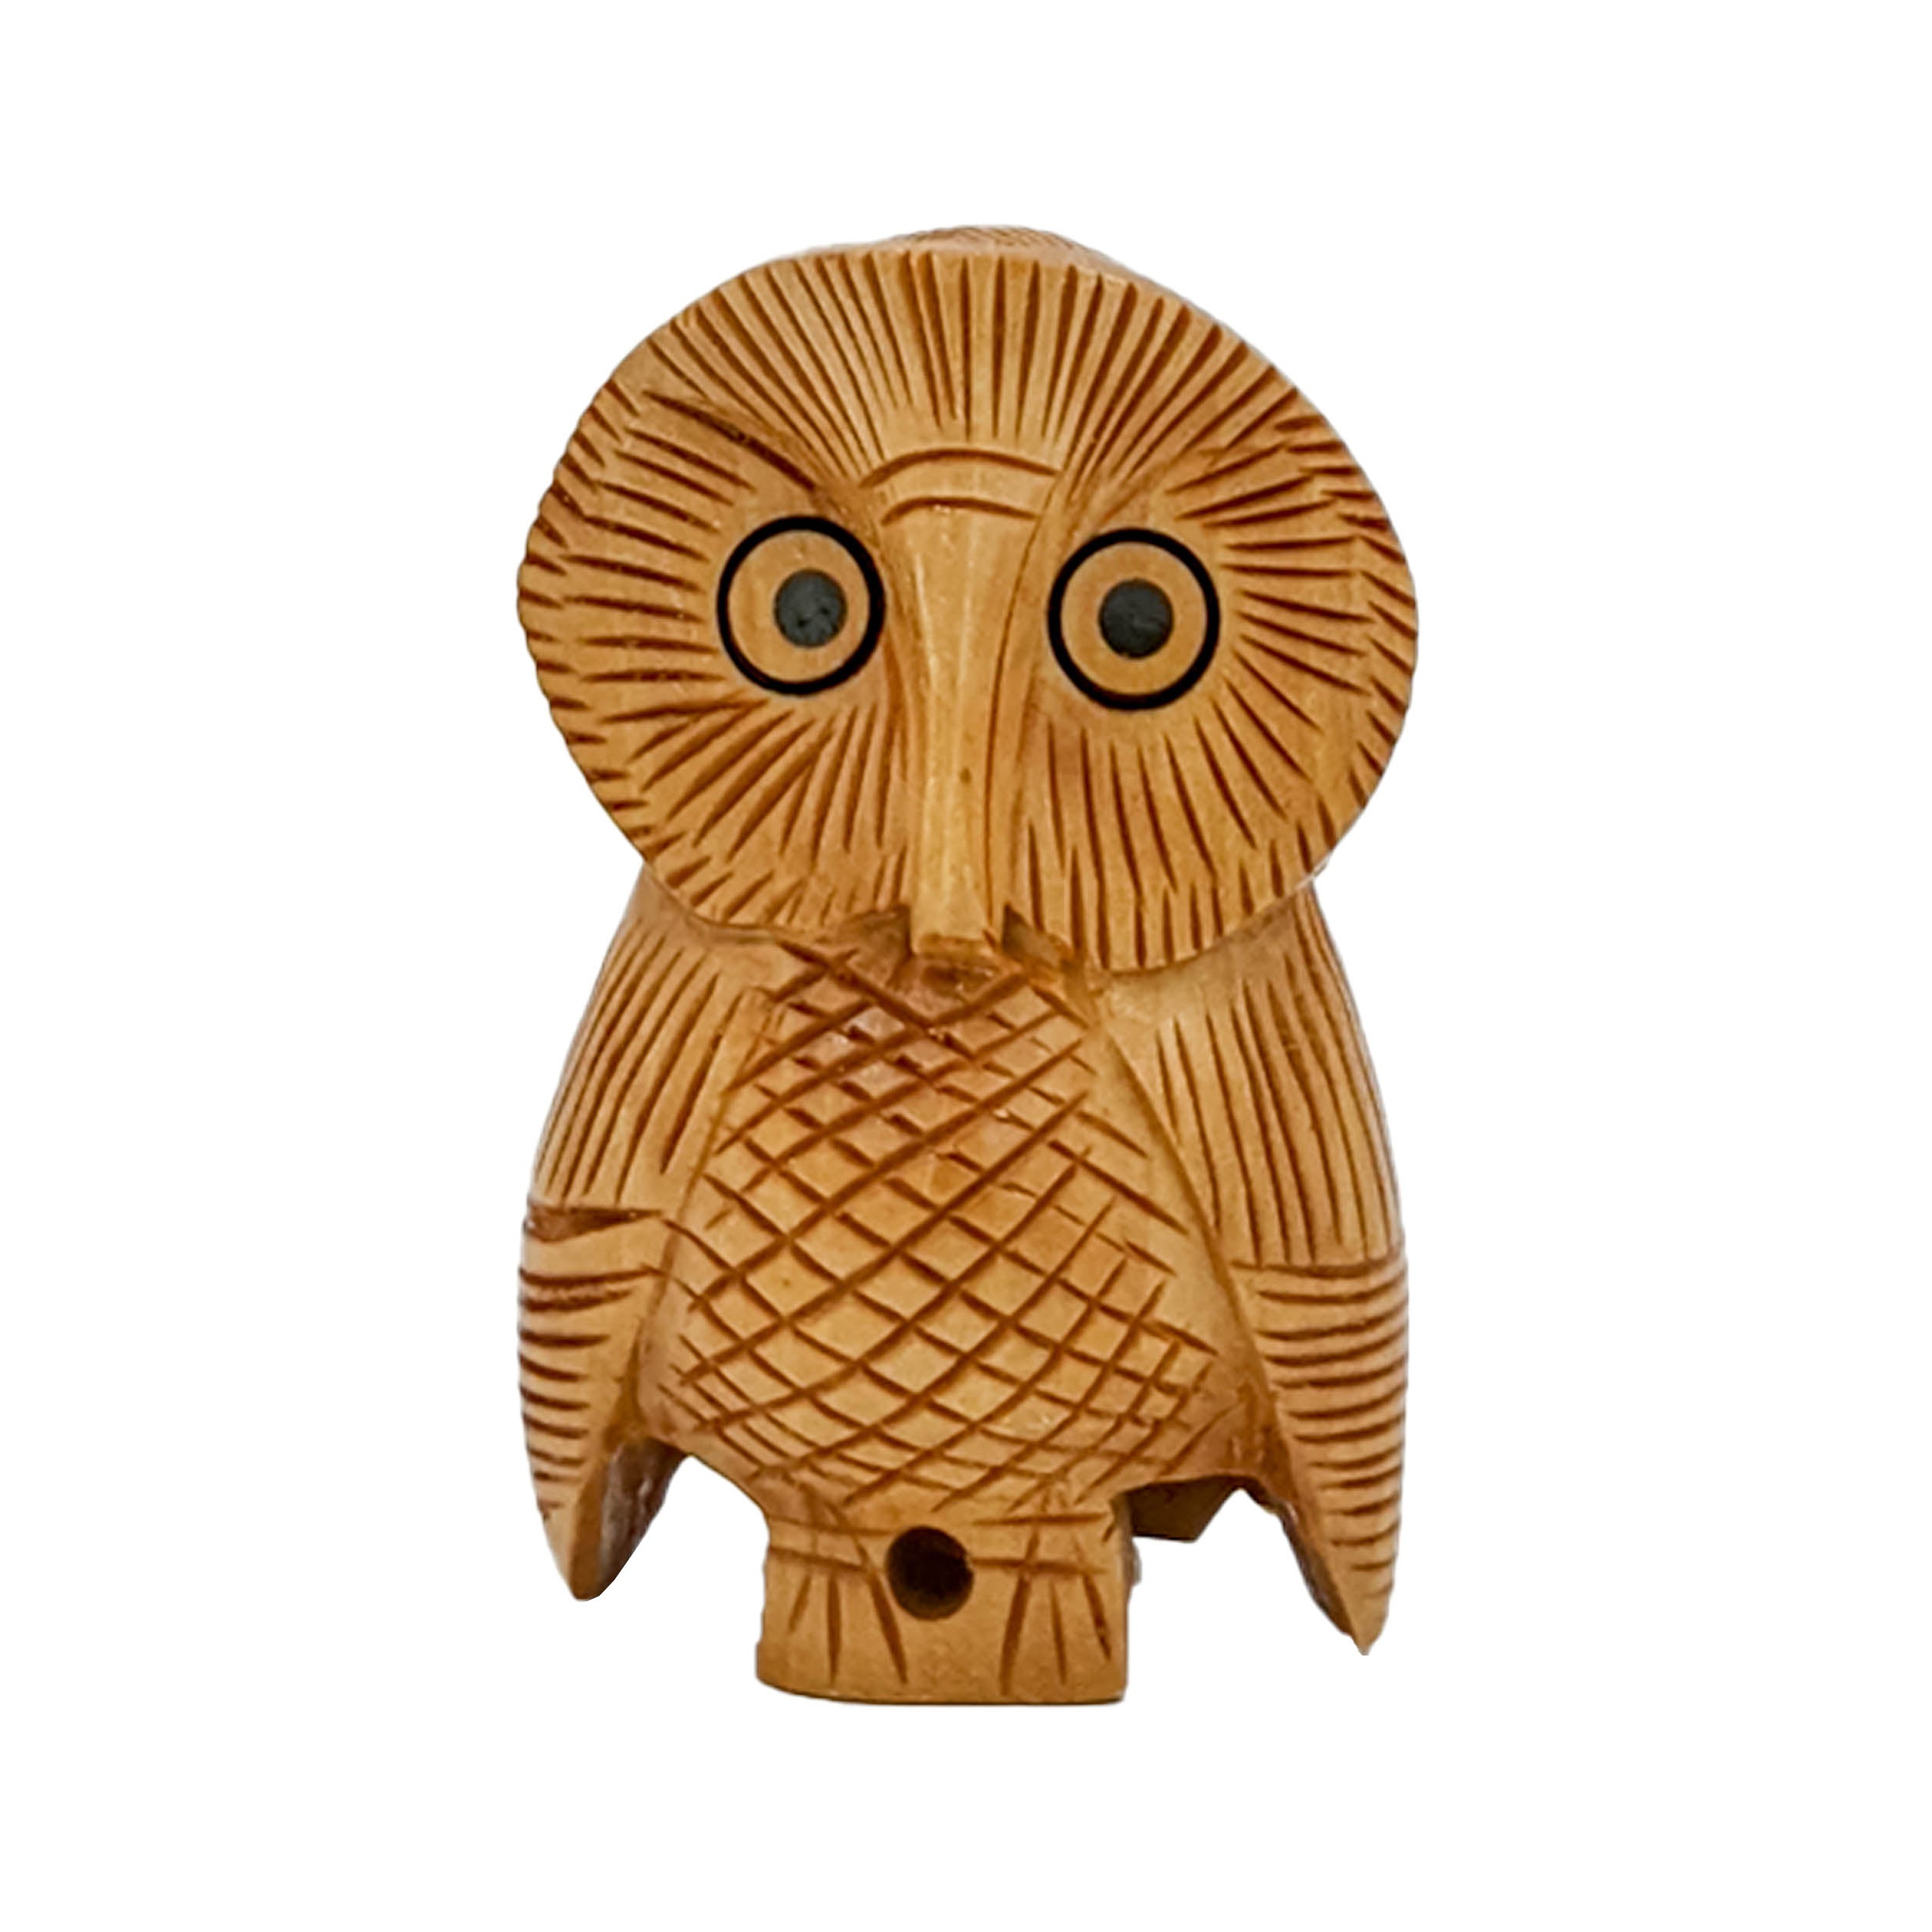 Bring Home the Charm of Handmade Wooden Owl Sitting